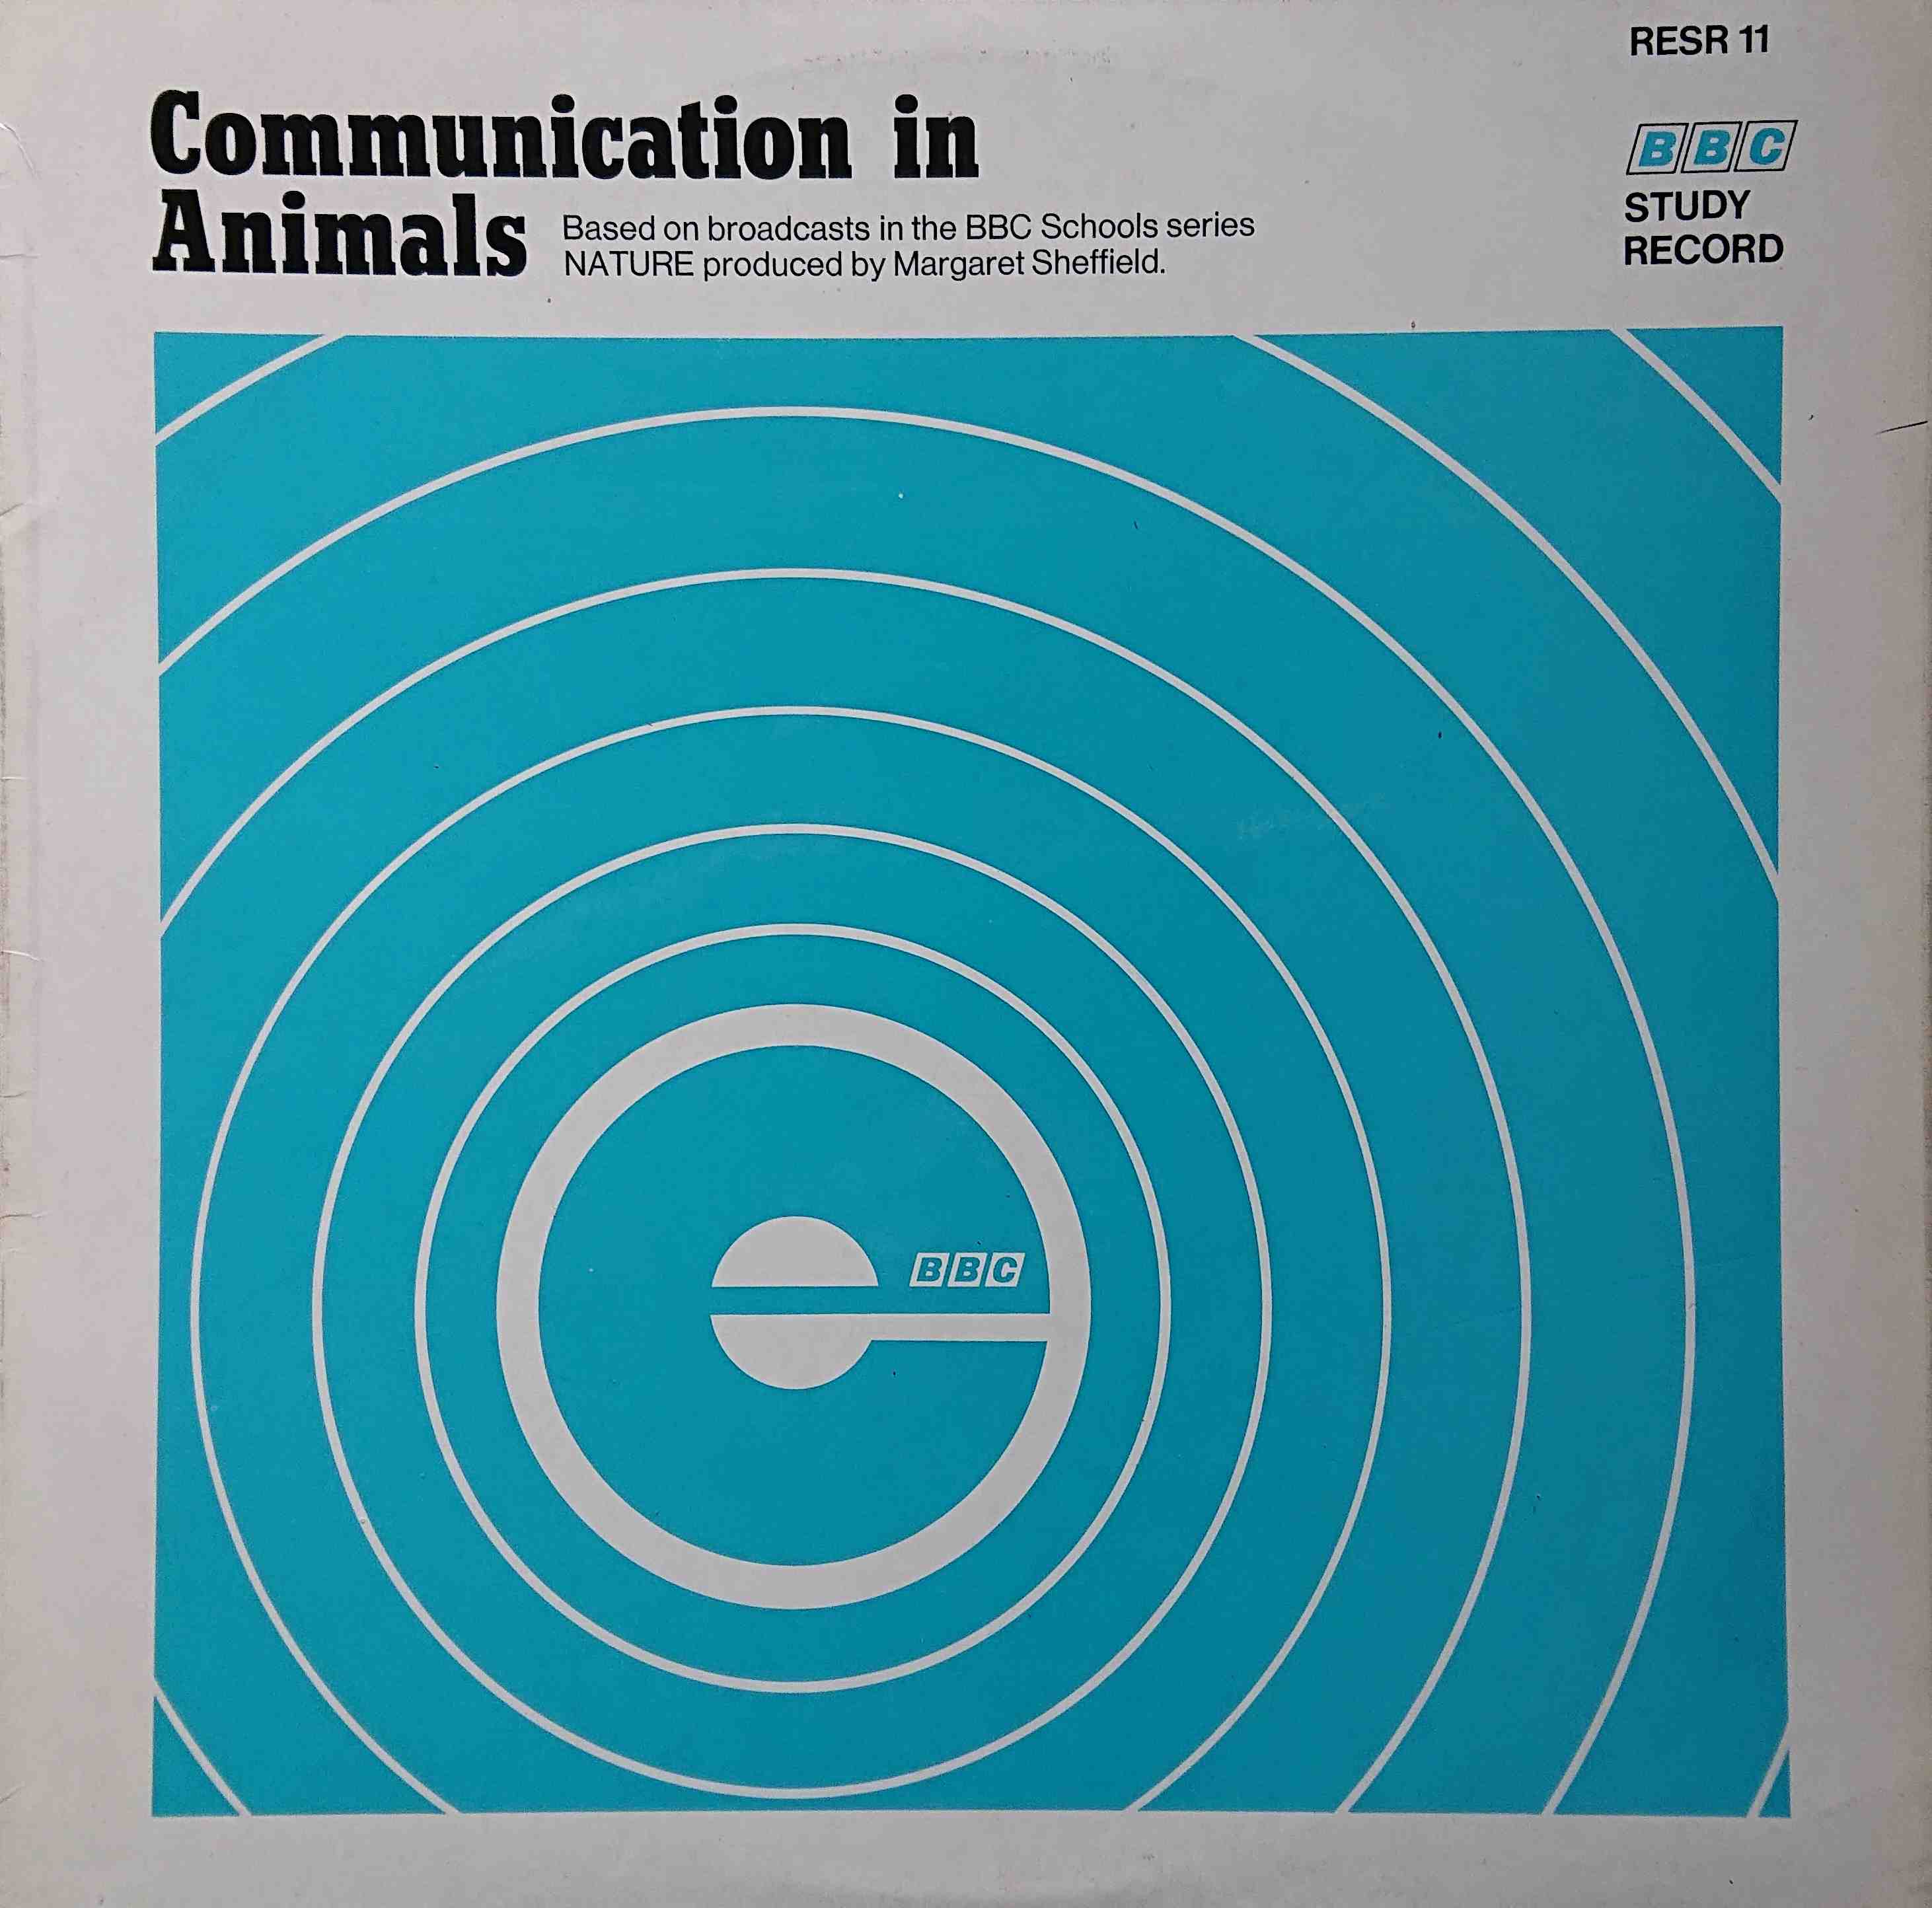 Picture of RESR 11 Communication in animals by artist Eric Simms from the BBC albums - Records and Tapes library